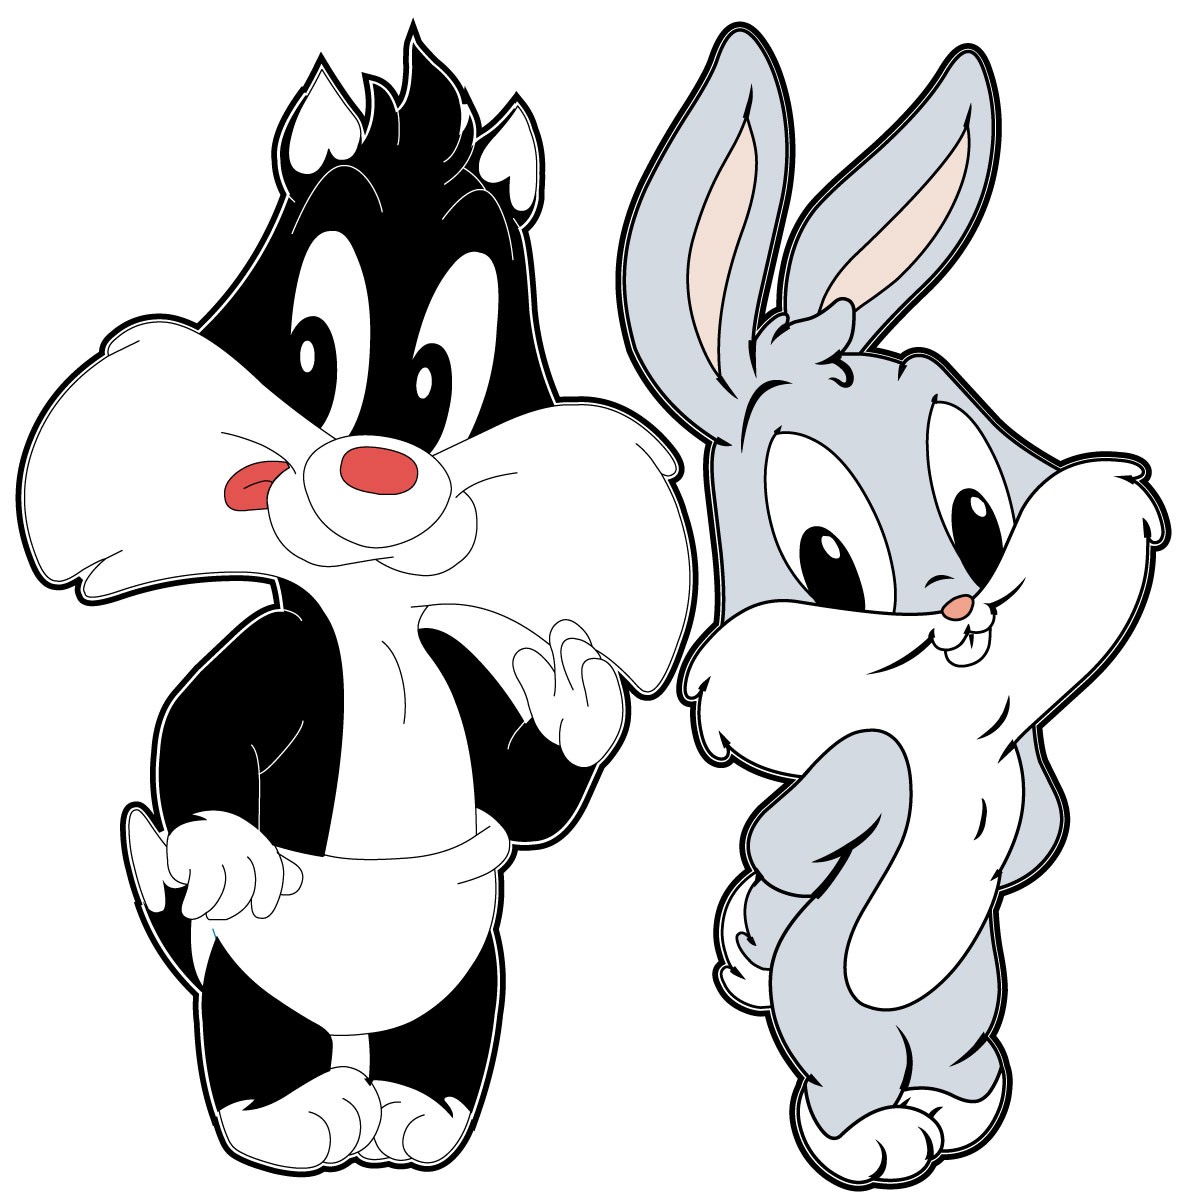 Baby Sylvester and Baby Bugs Bunny Wallpaper For Free Download 